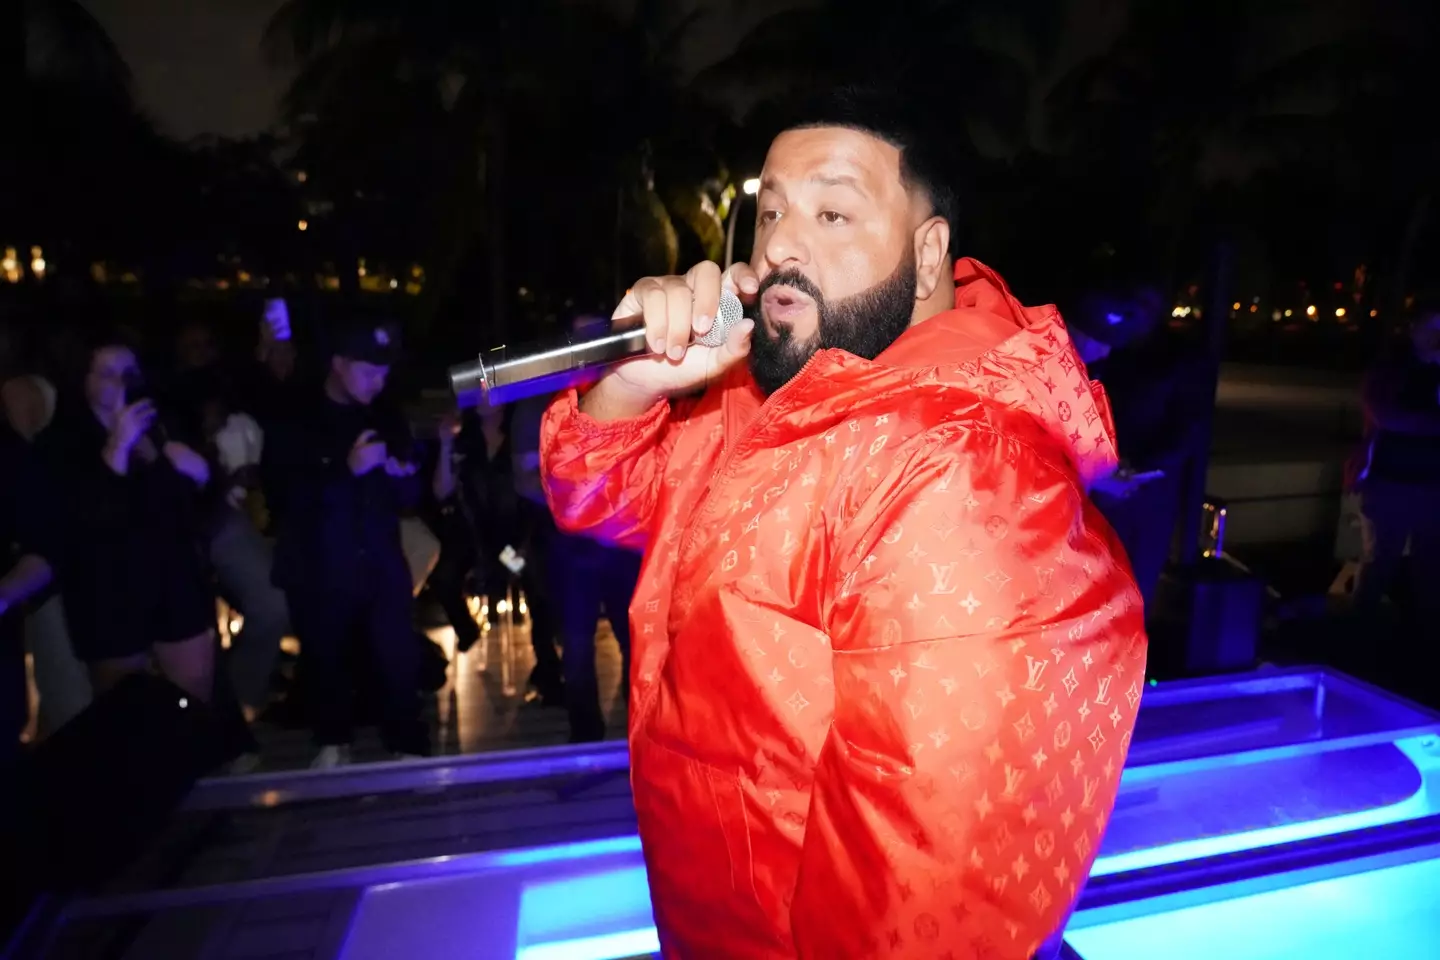 DJ Khaled was also fined for not disclosing his involvement.